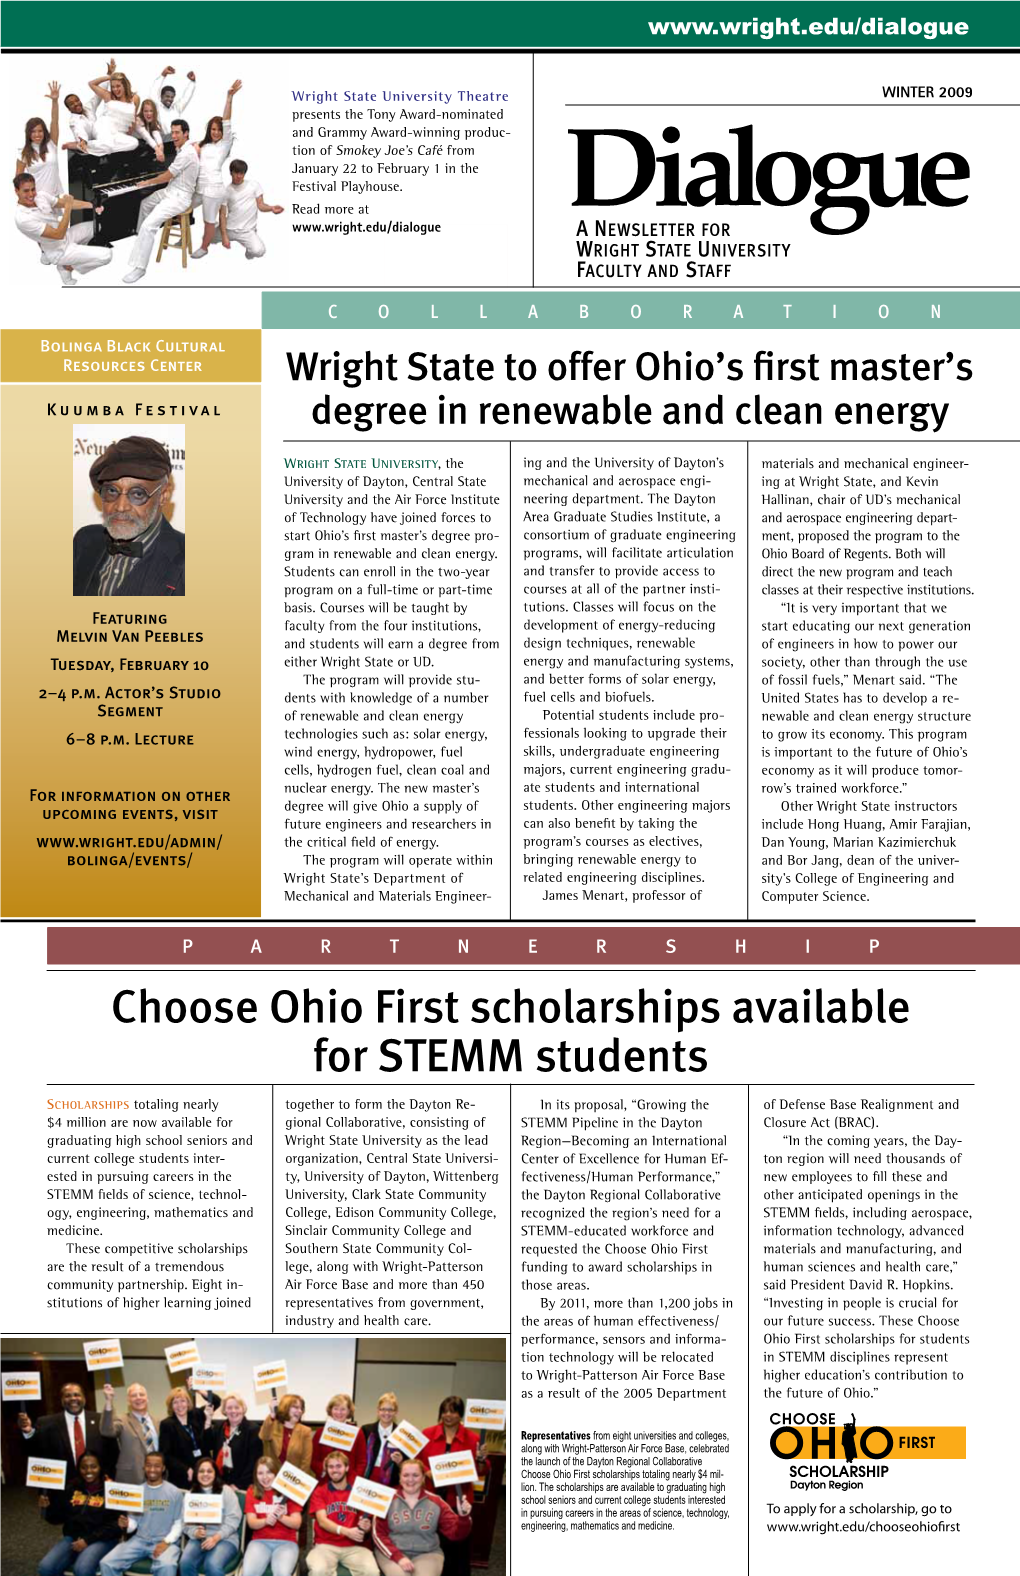 Choose Ohio First Scholarships Available for STEMM Students